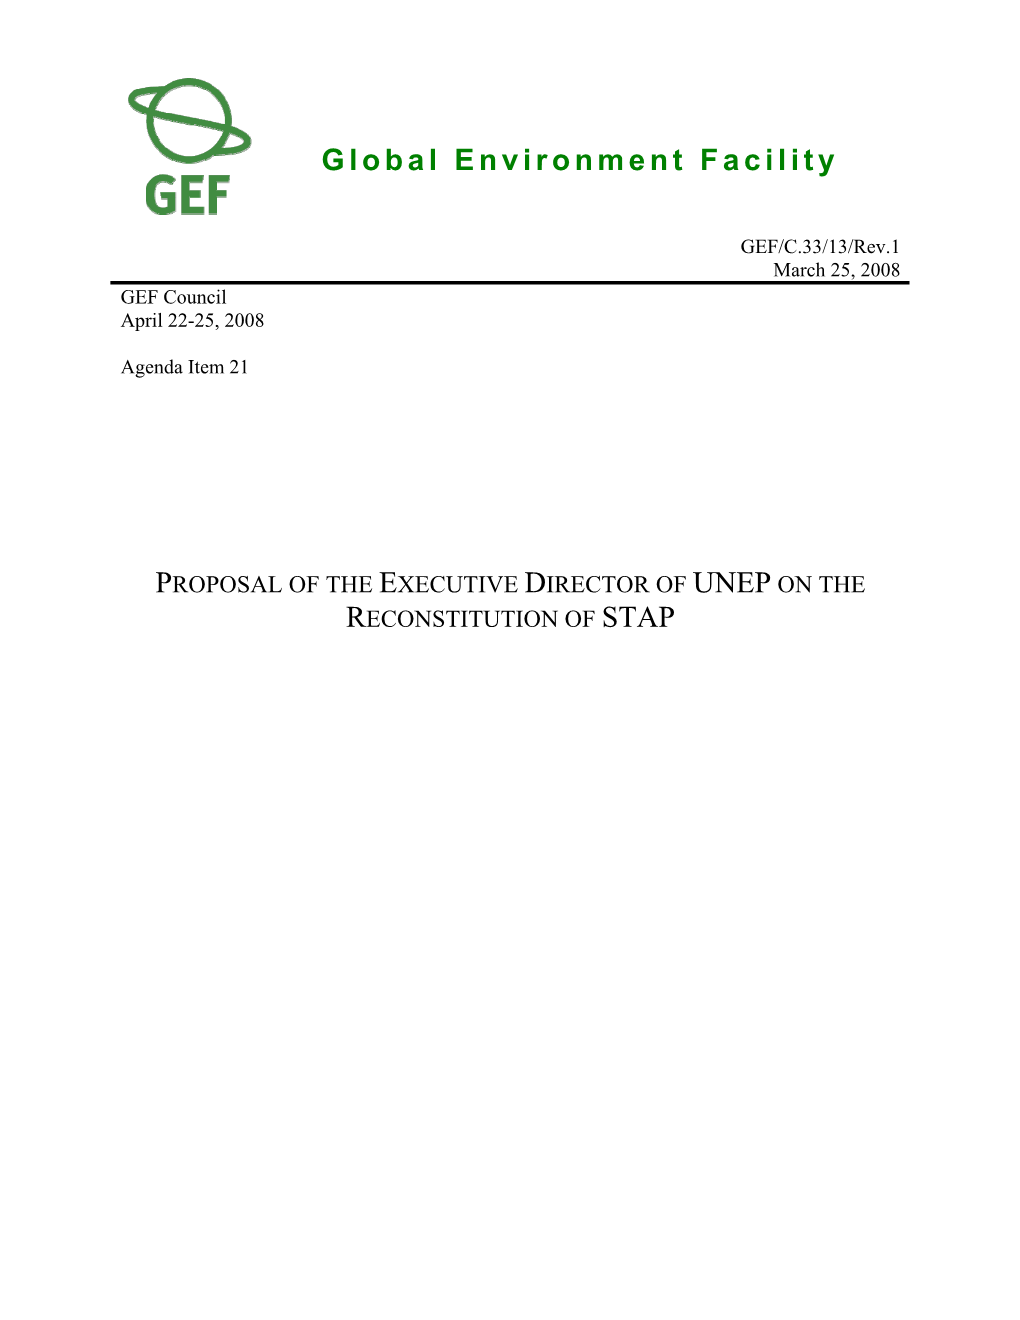 Proposal of the Executive Director of Unep on the Reconstitution of Stap